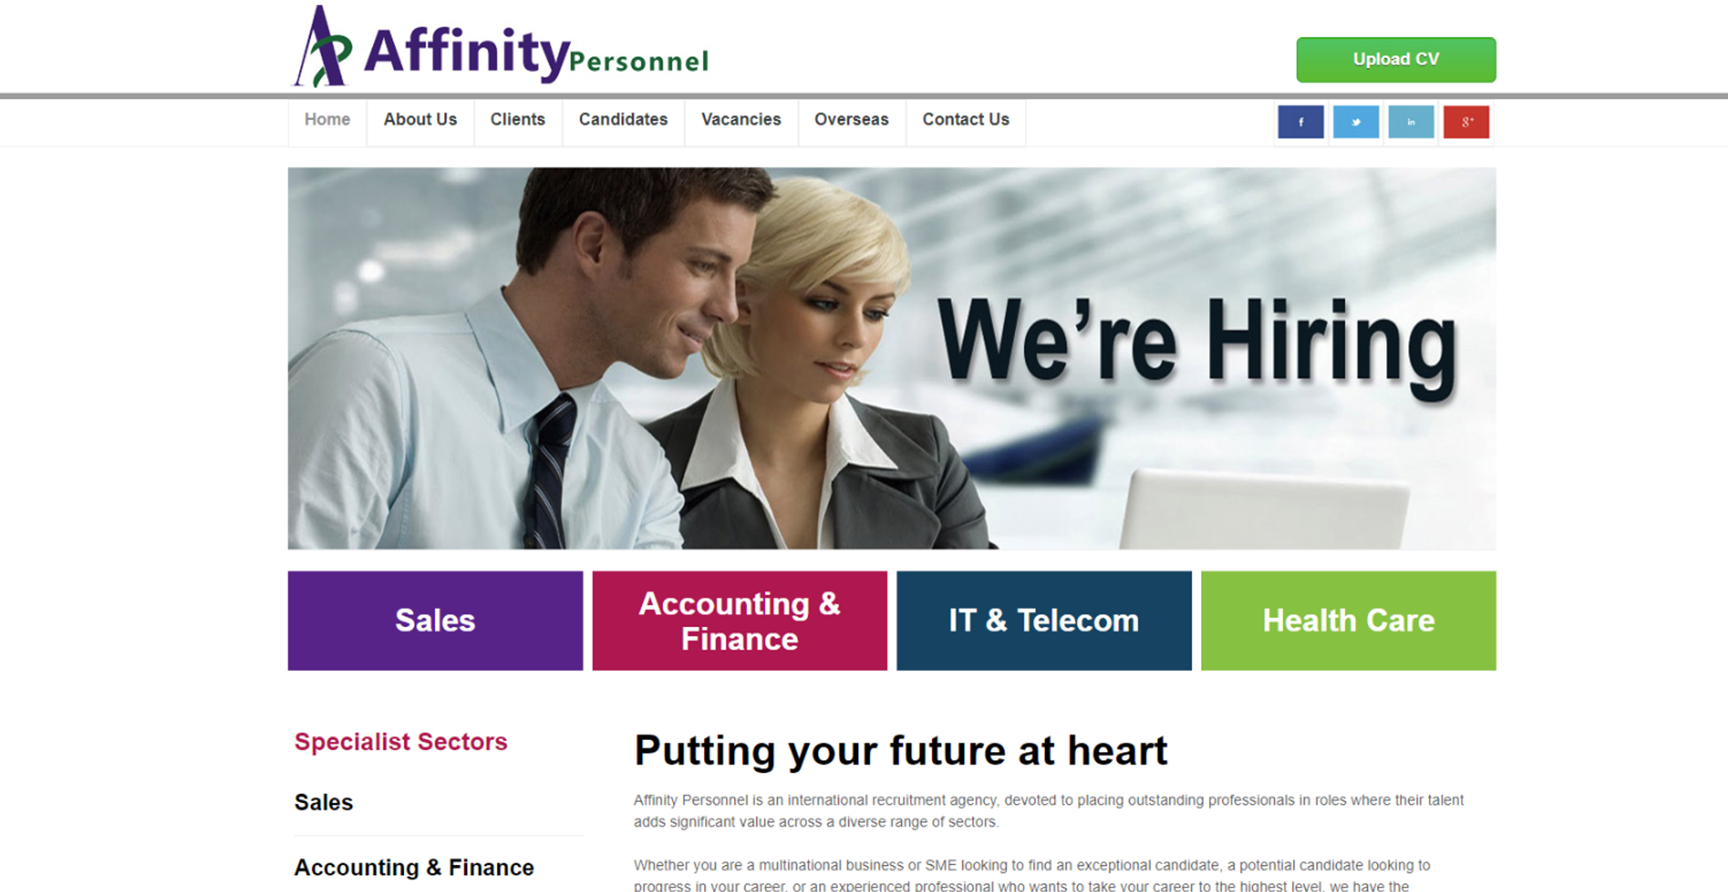 Affinity Personnel